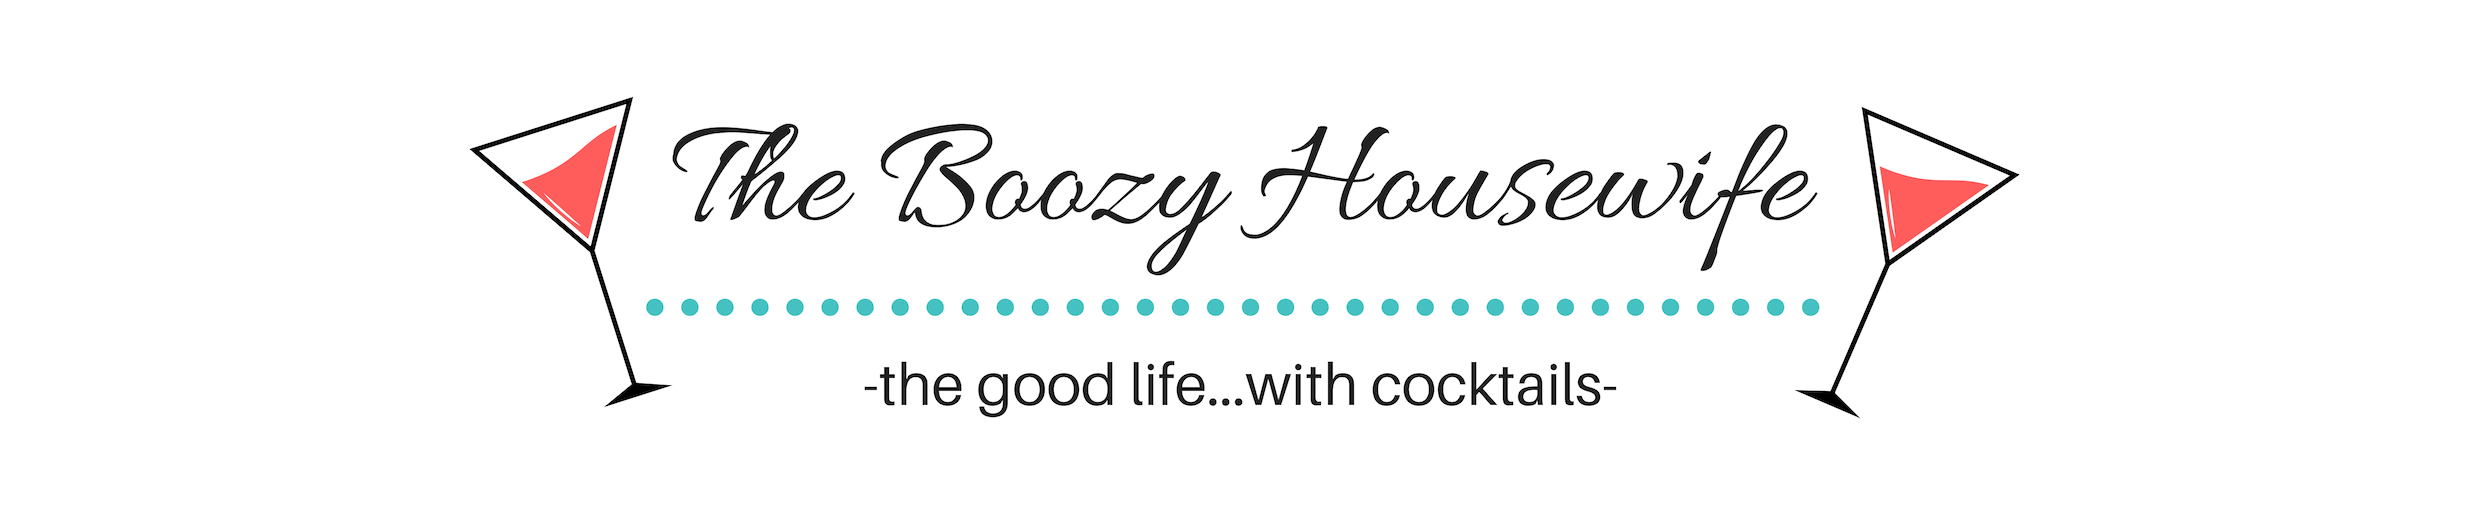 The Boozy Housewife